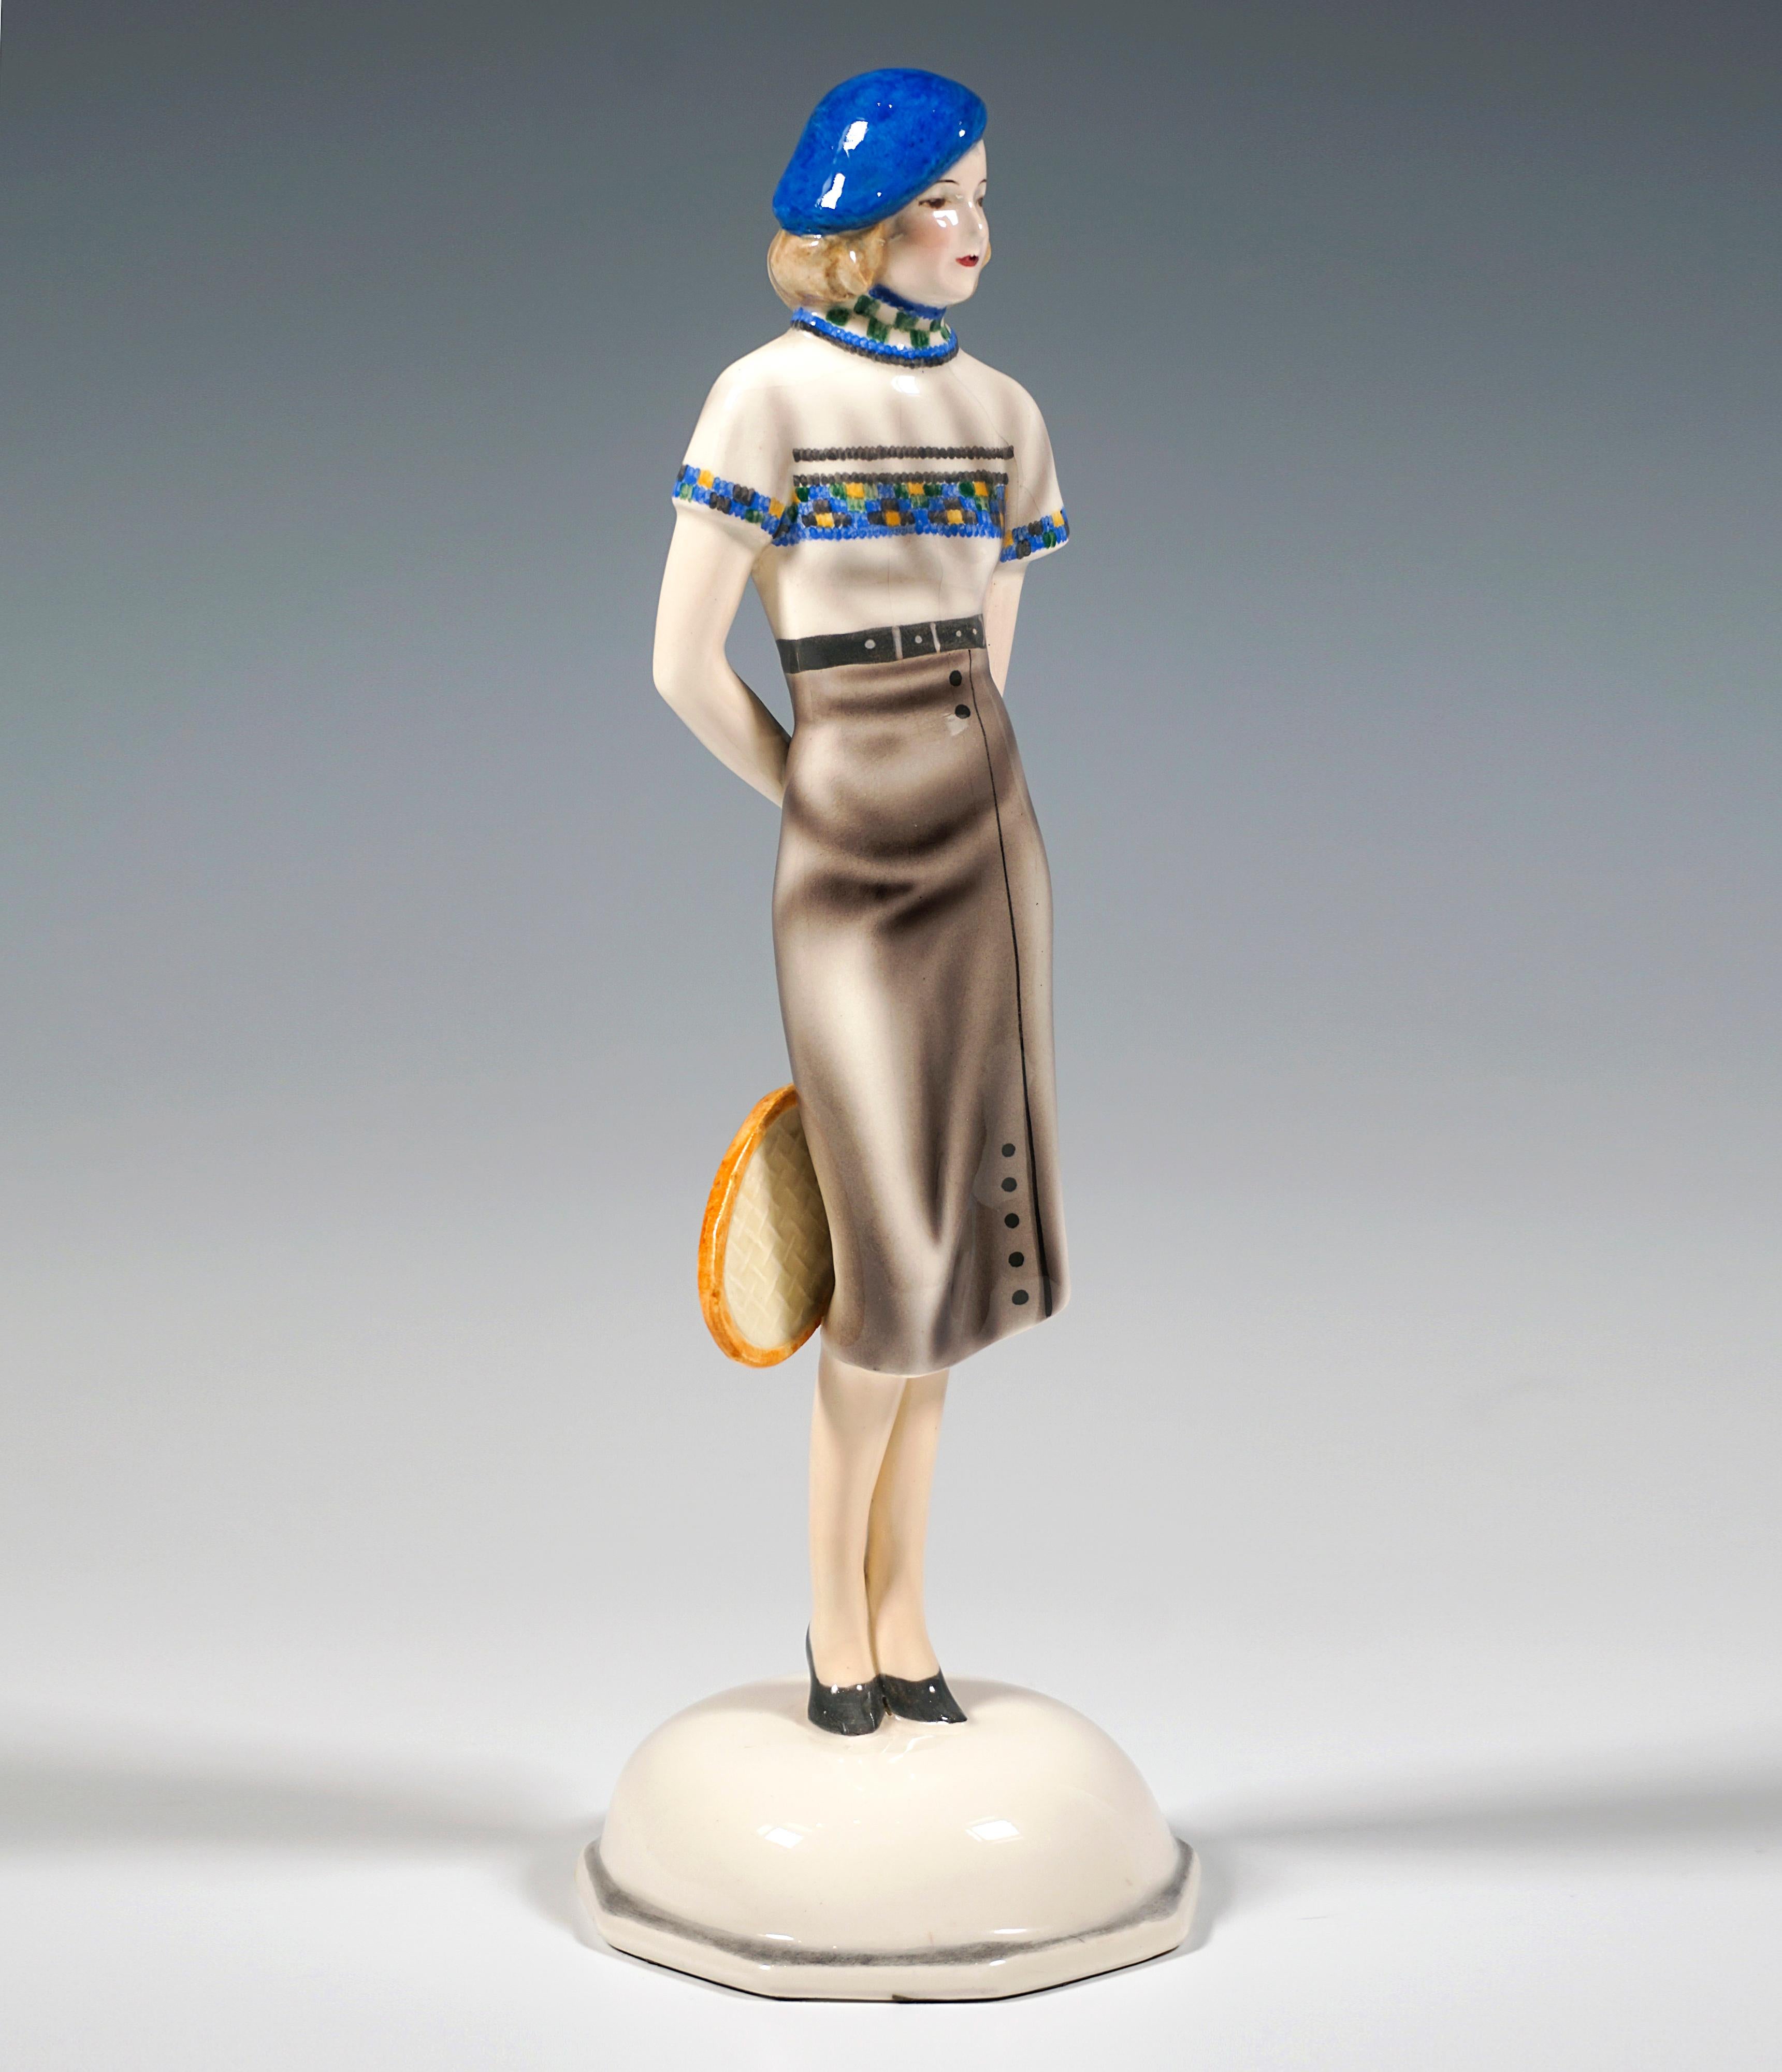 Very Rare Goldscheider Vienna Ceramic Figurine of the 1930s:
Standing elegant young lady with a blue beret cap on her chin-length blond hair, wearing a patterned short-sleeved sweater and a long, tight skirt, holding a tennis racket with her left